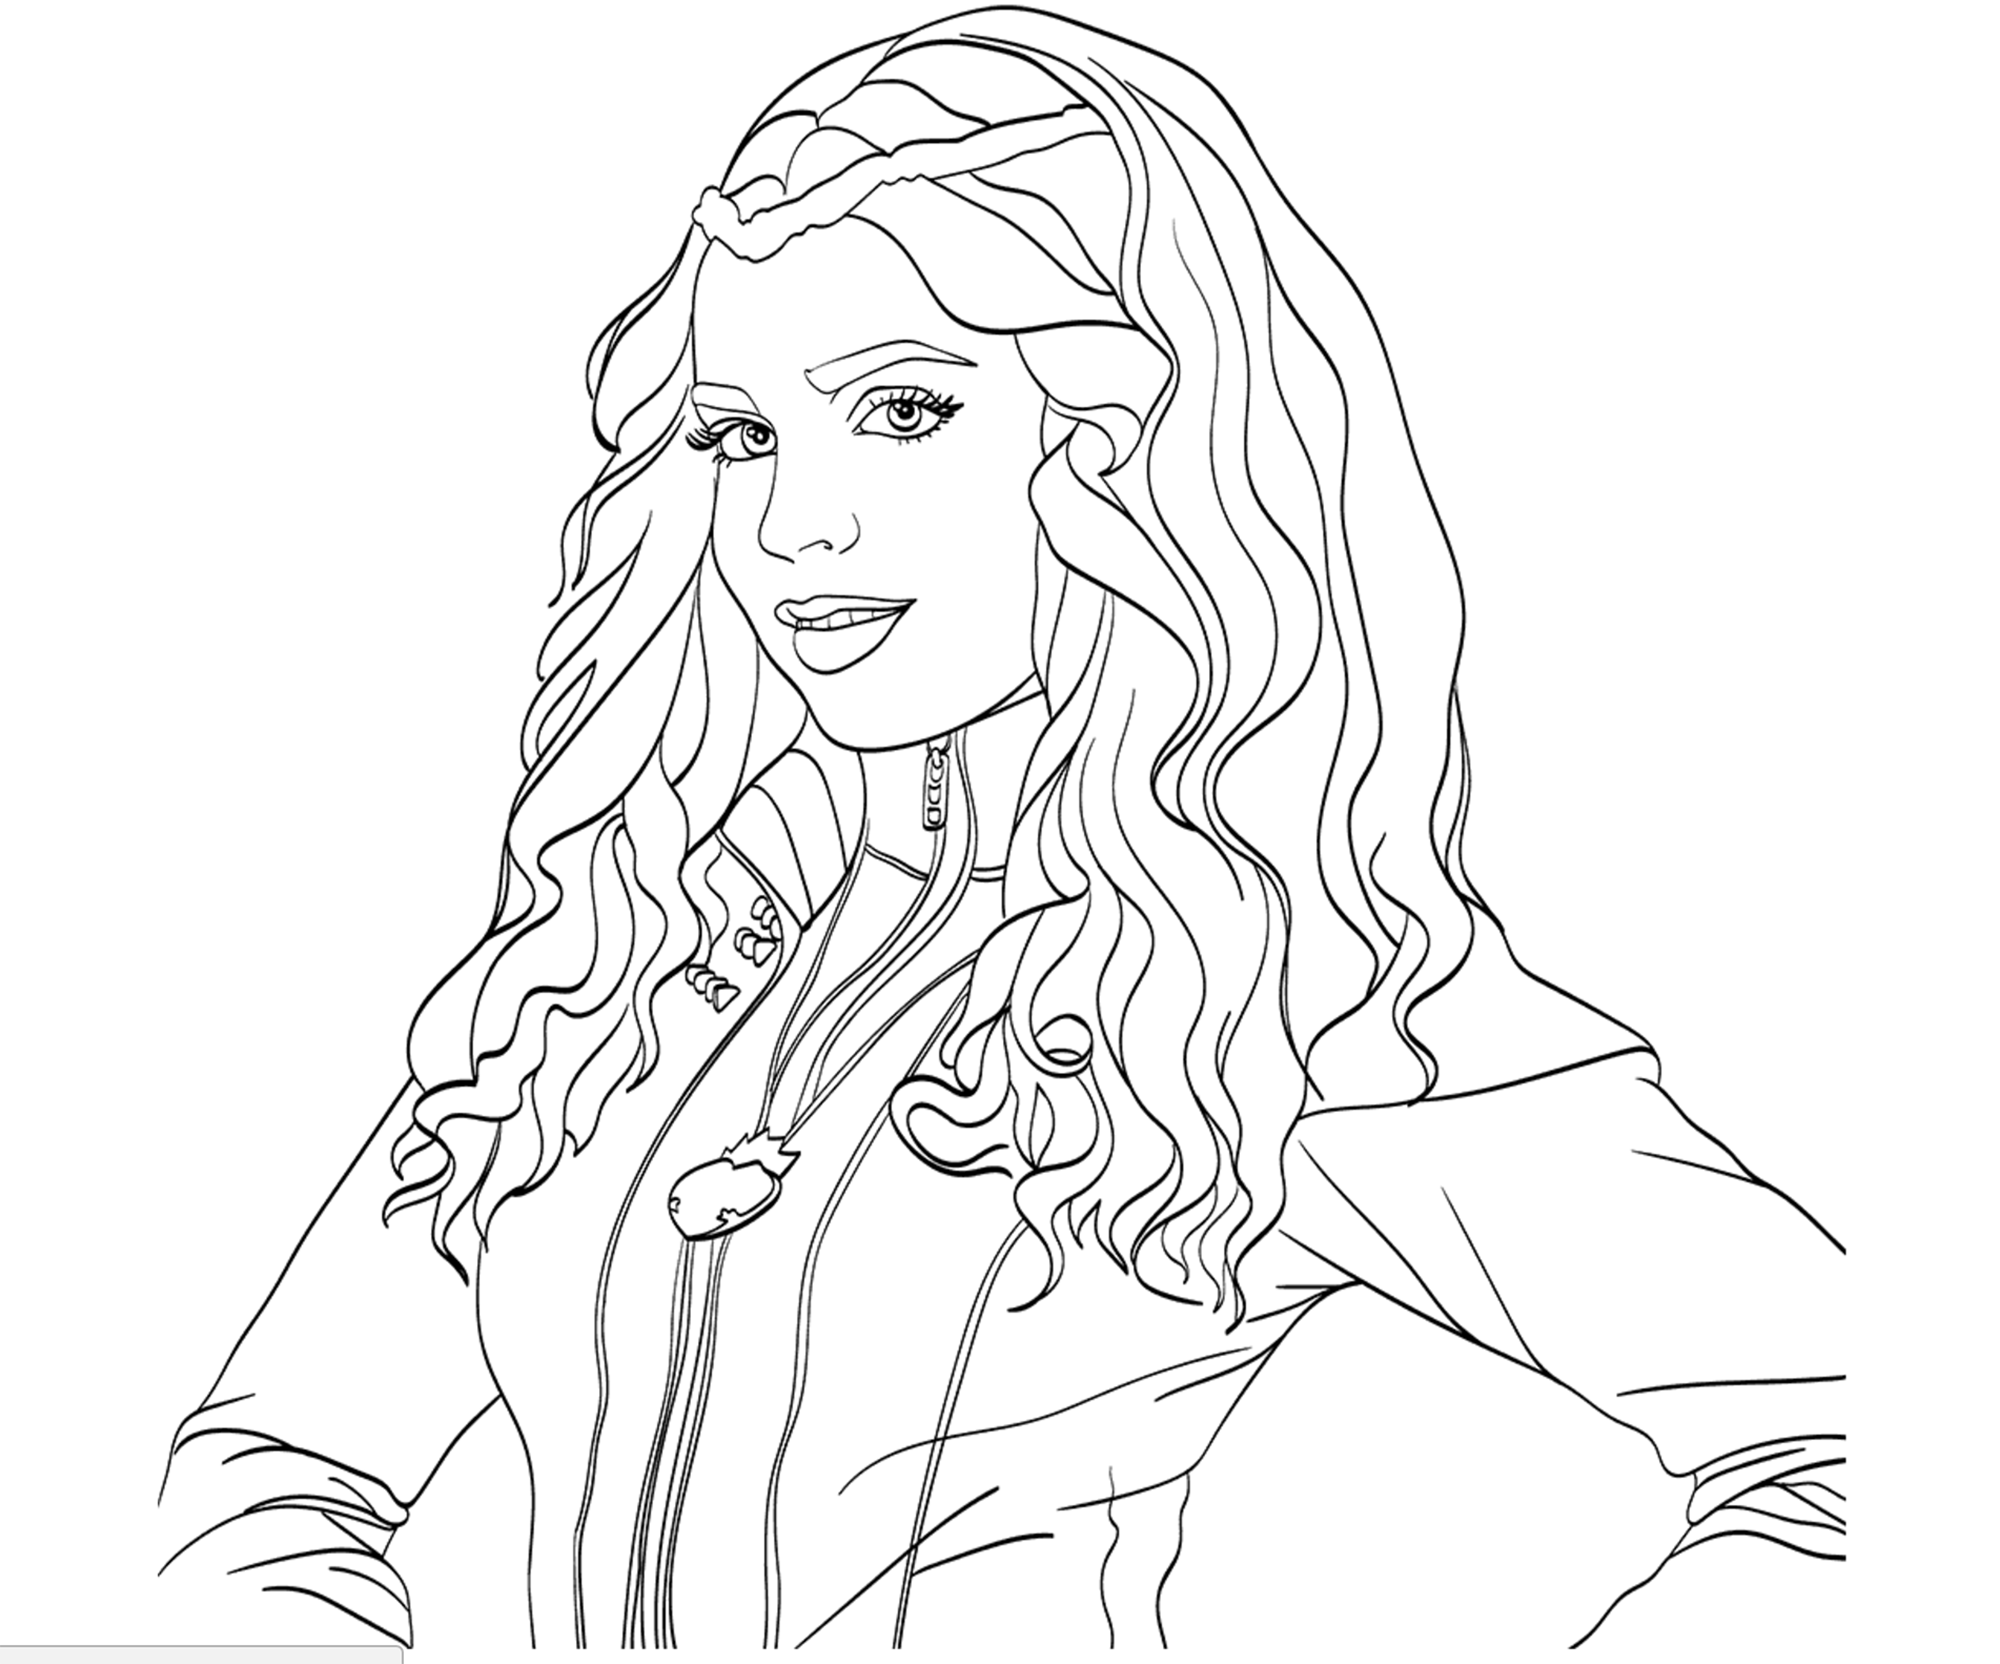 Free The Descendants coloring page to download